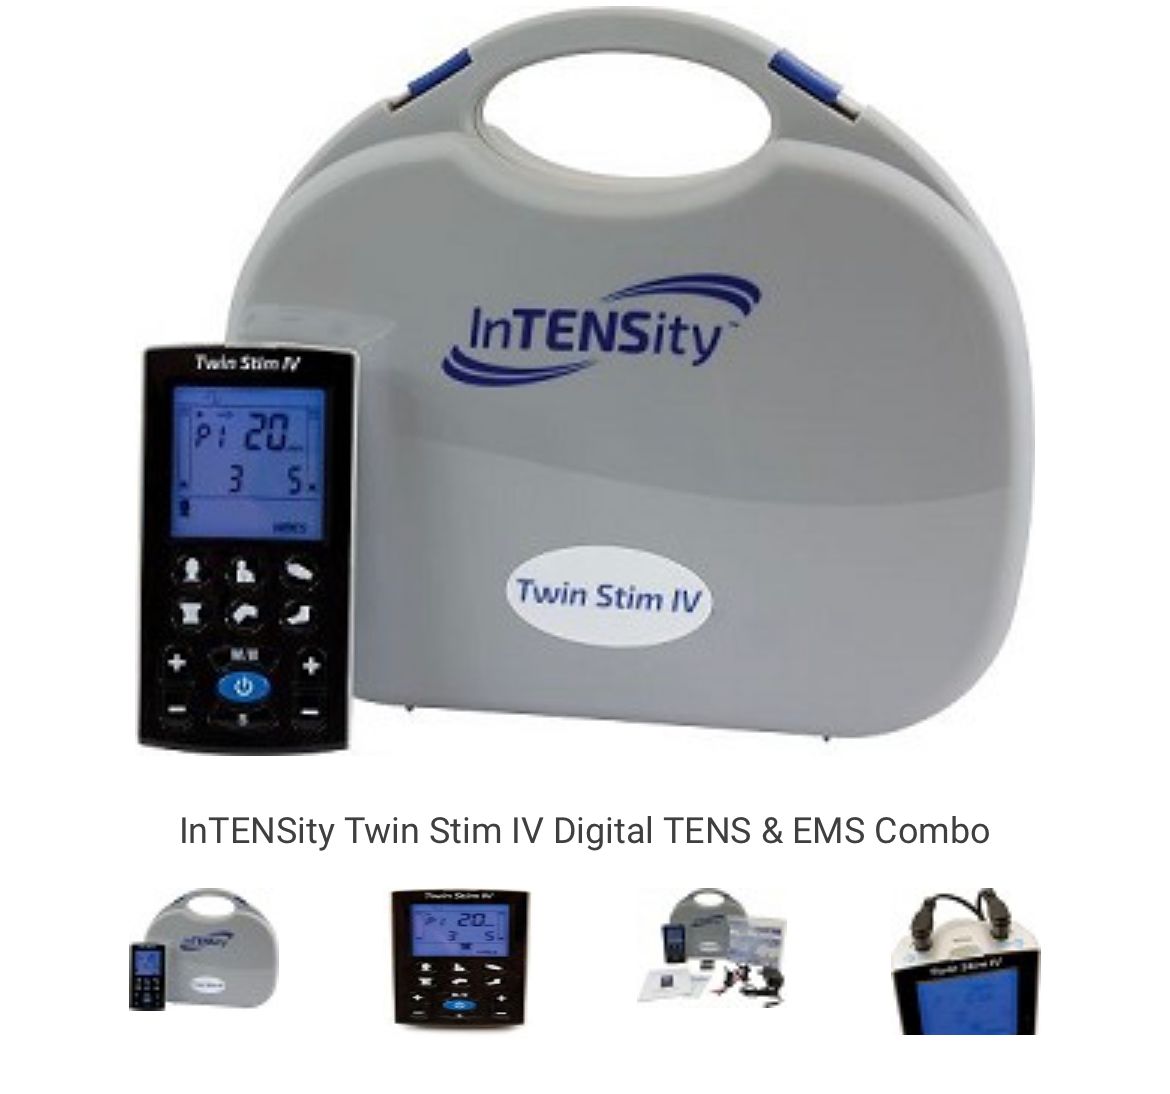 Fully rechargeable tens unit